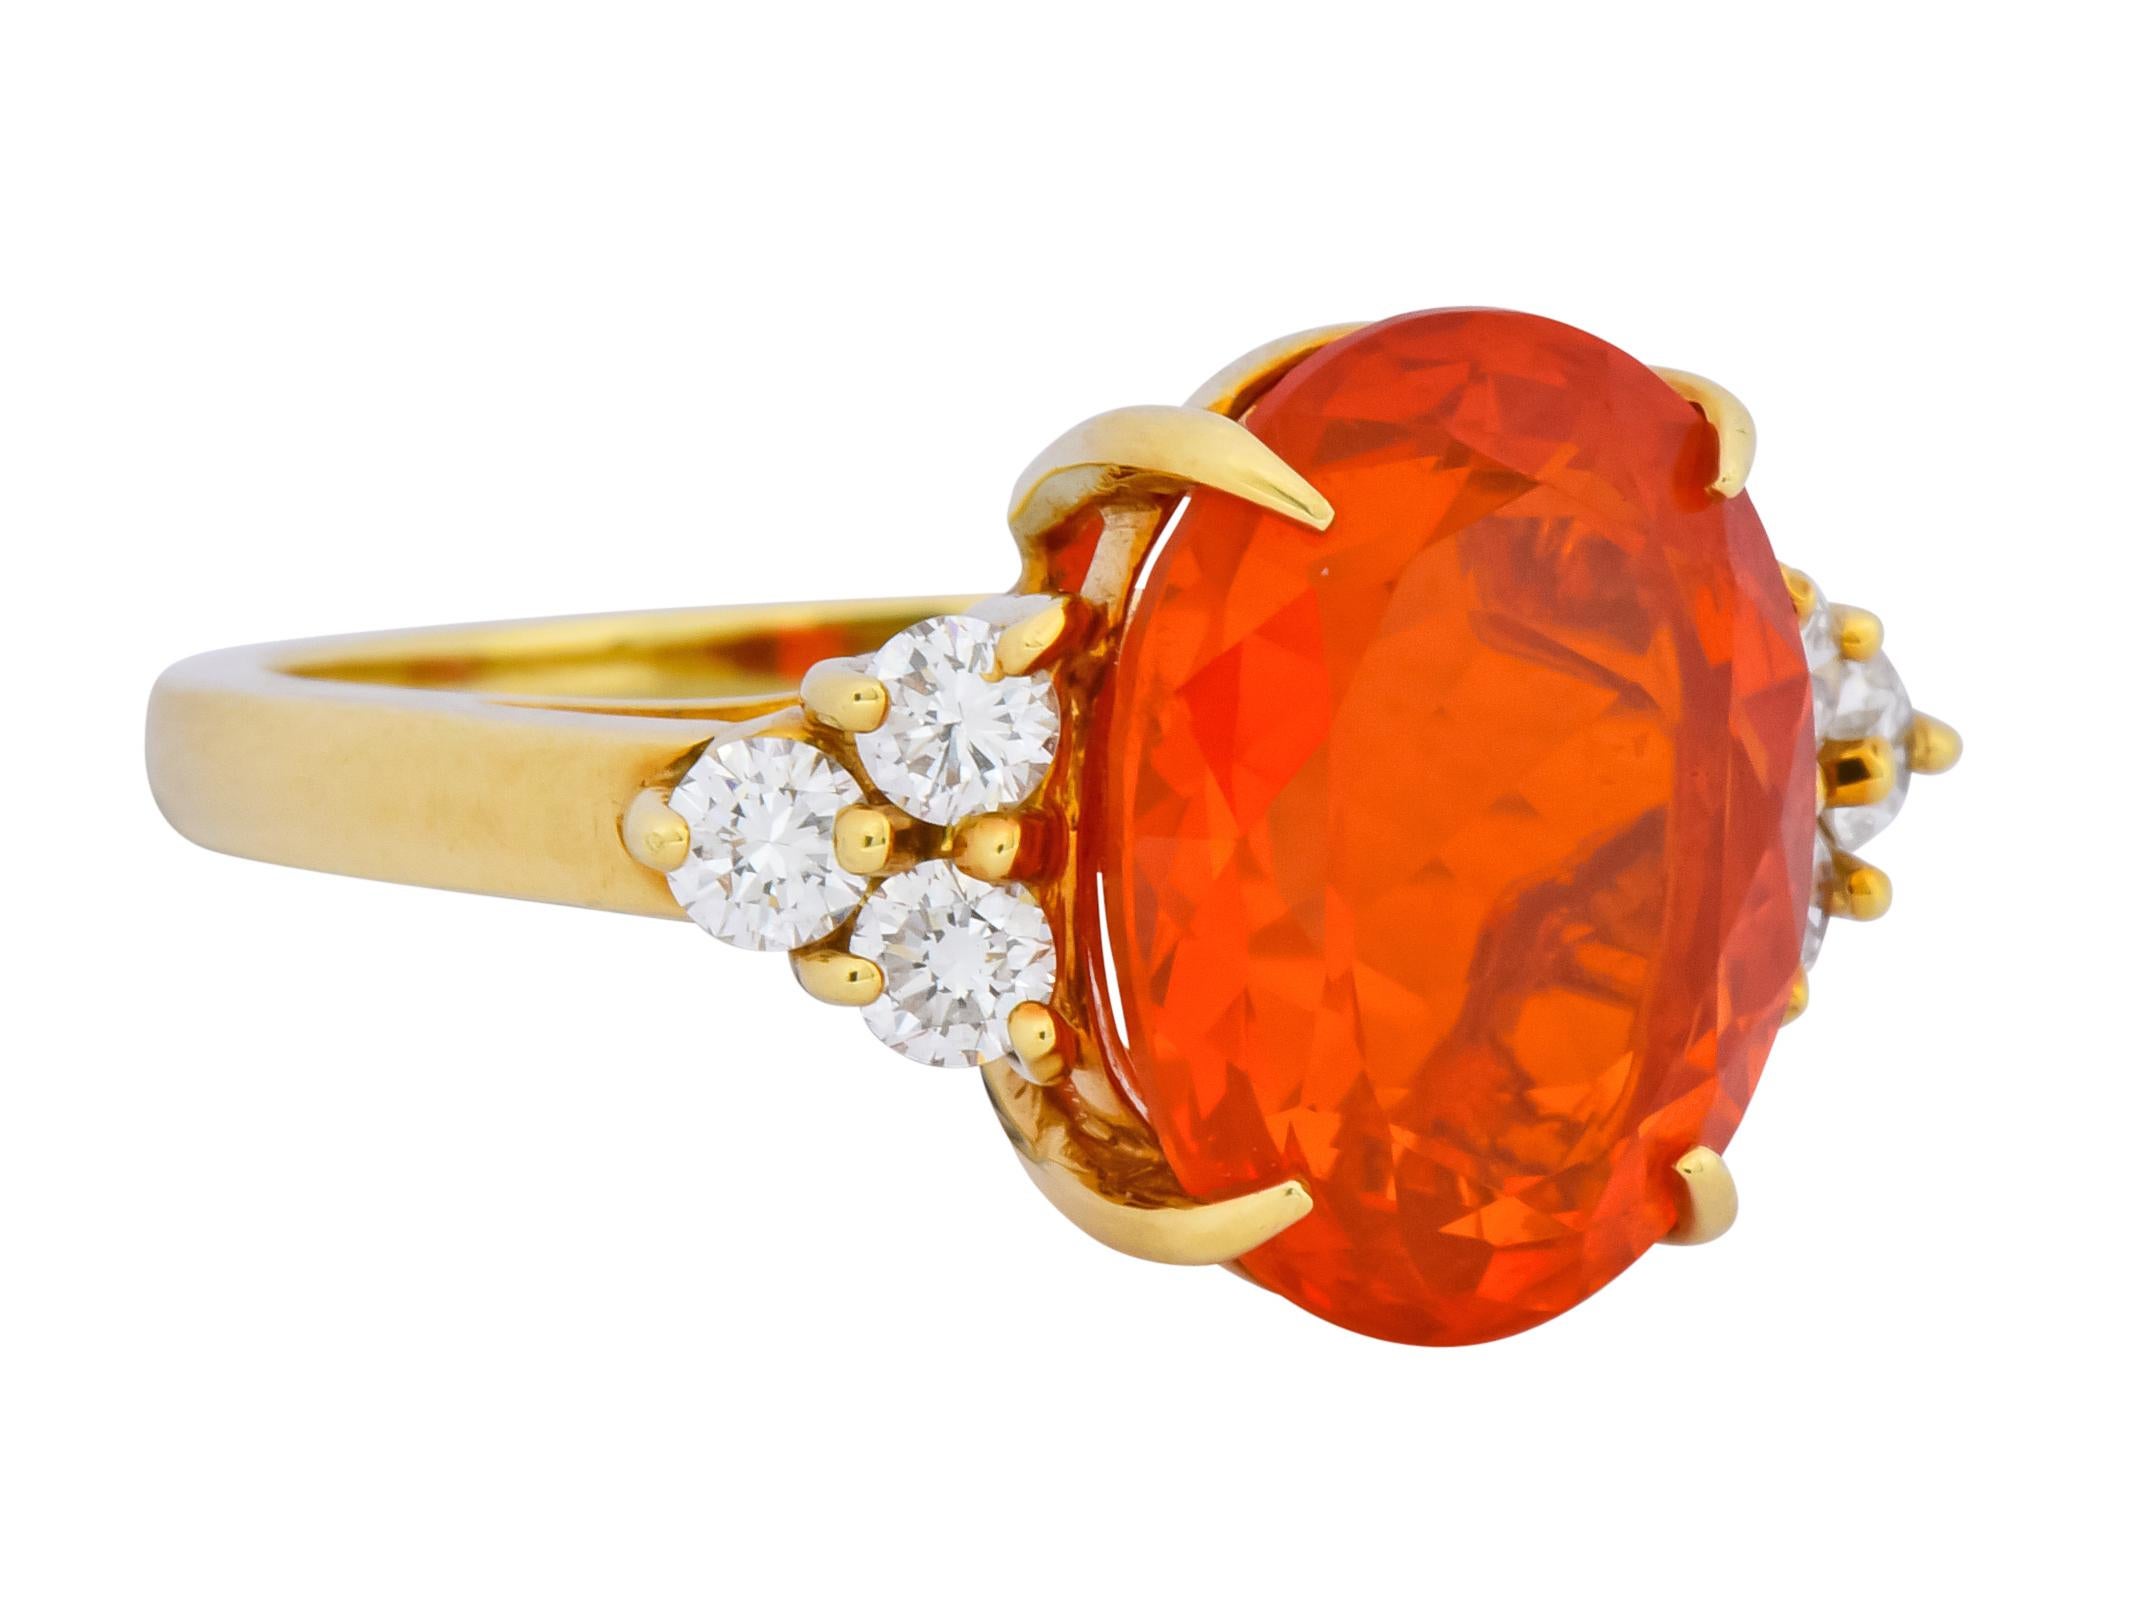 Centering a claw set oval cut fire opal weighing approximately 4.50 carats, transparent and glowing orange in color

Flanked by round brilliant cut diamonds, prong set in triangular formations, weighing approximately 0.36 carat, G/H color and VS